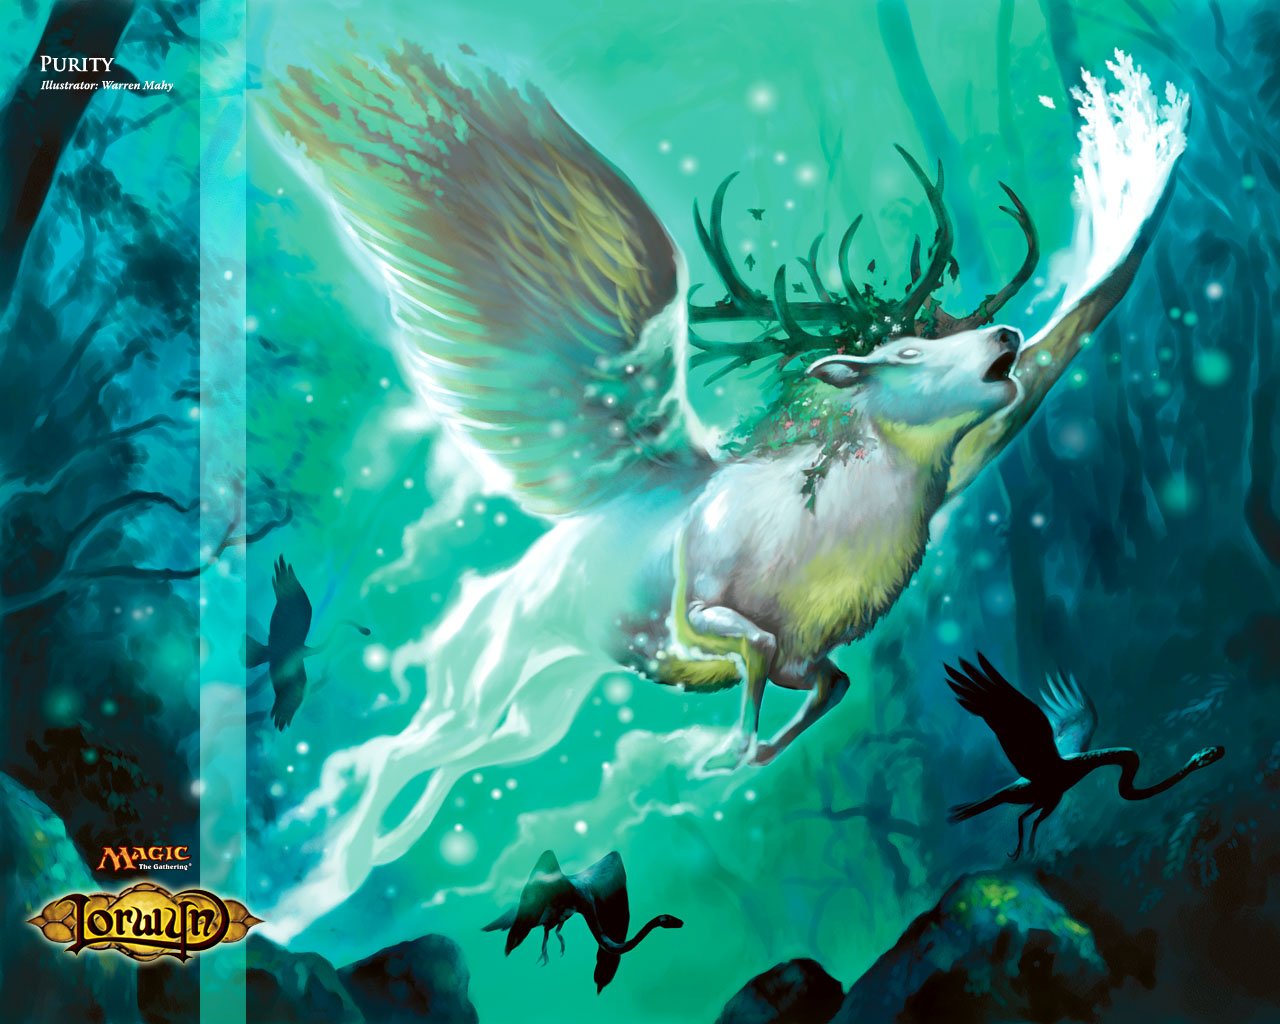 Gathering Wallpaper Purity Magic The Gathering Res 1280x1024 HD